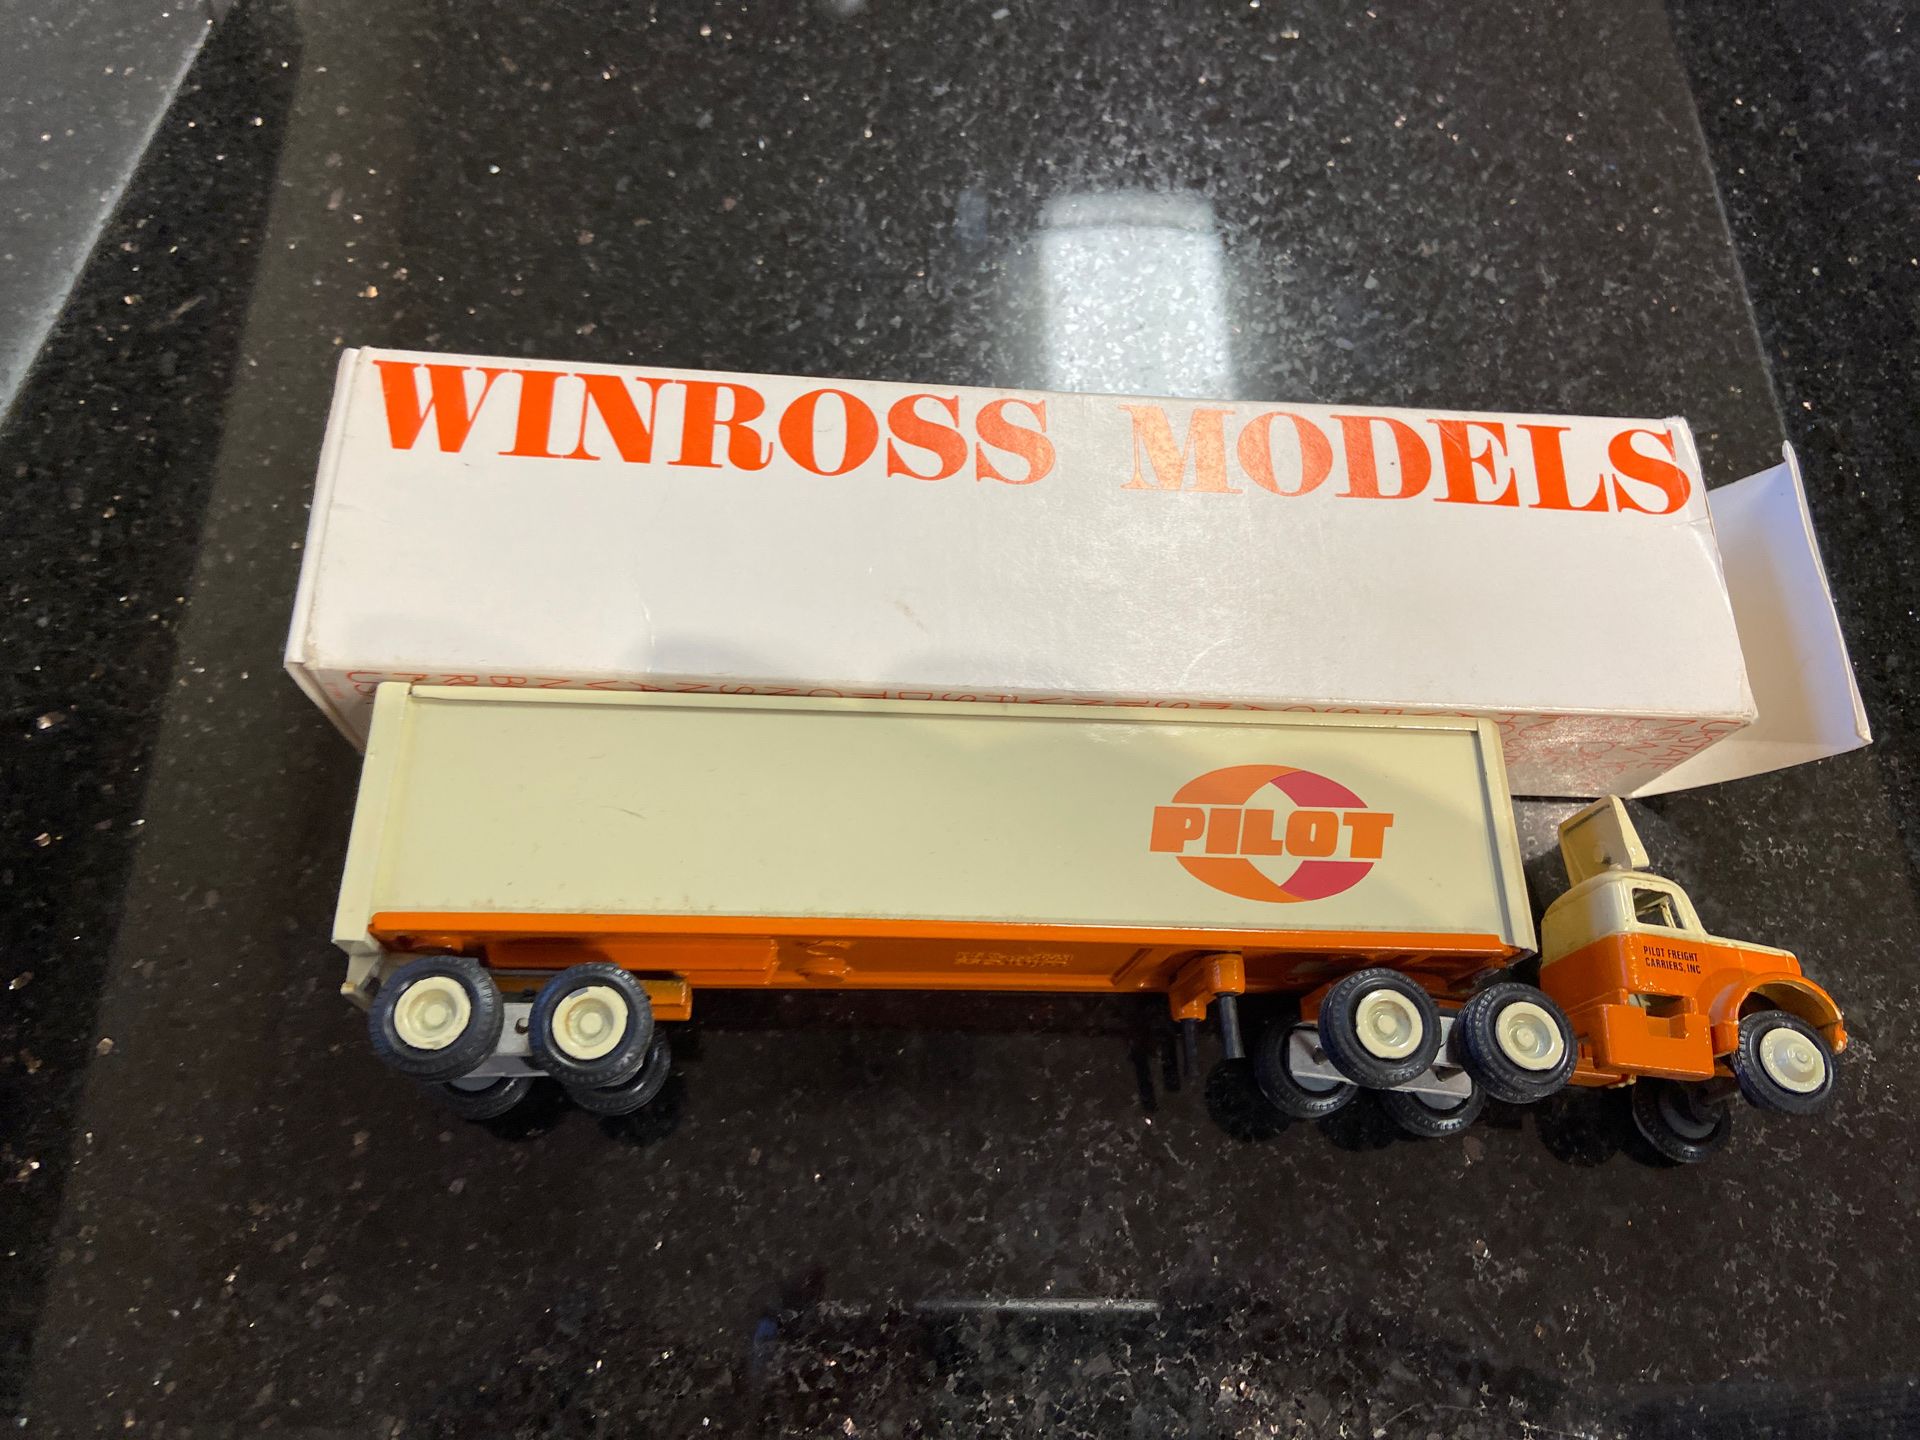 Collectible toy semi truck #100375-1